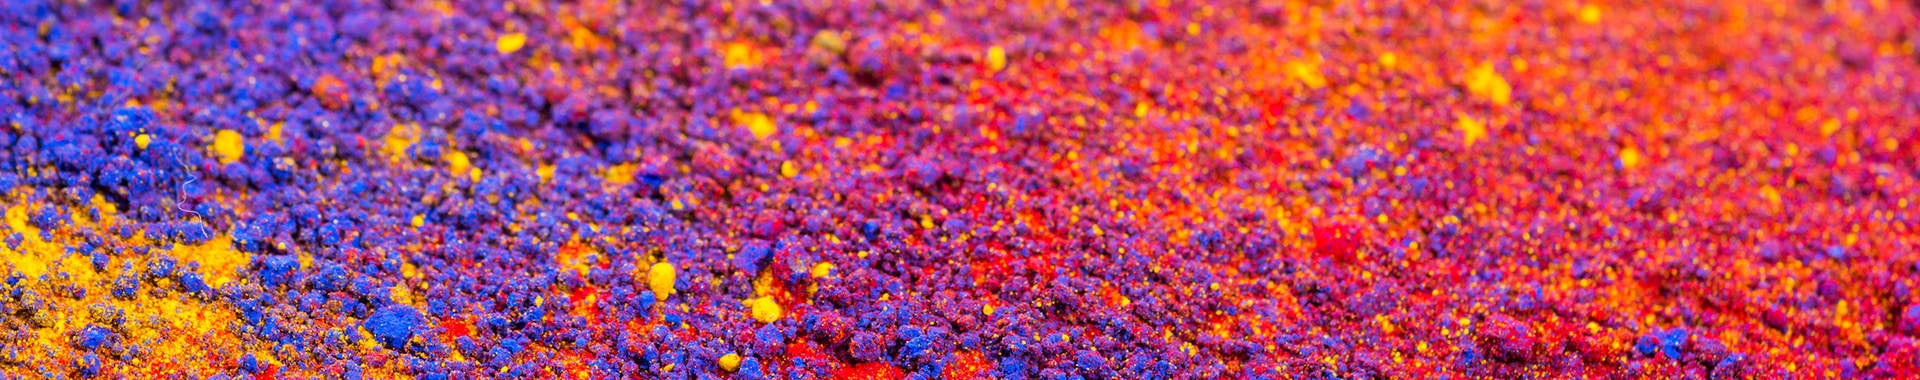 Abstract image of multi-colored dust